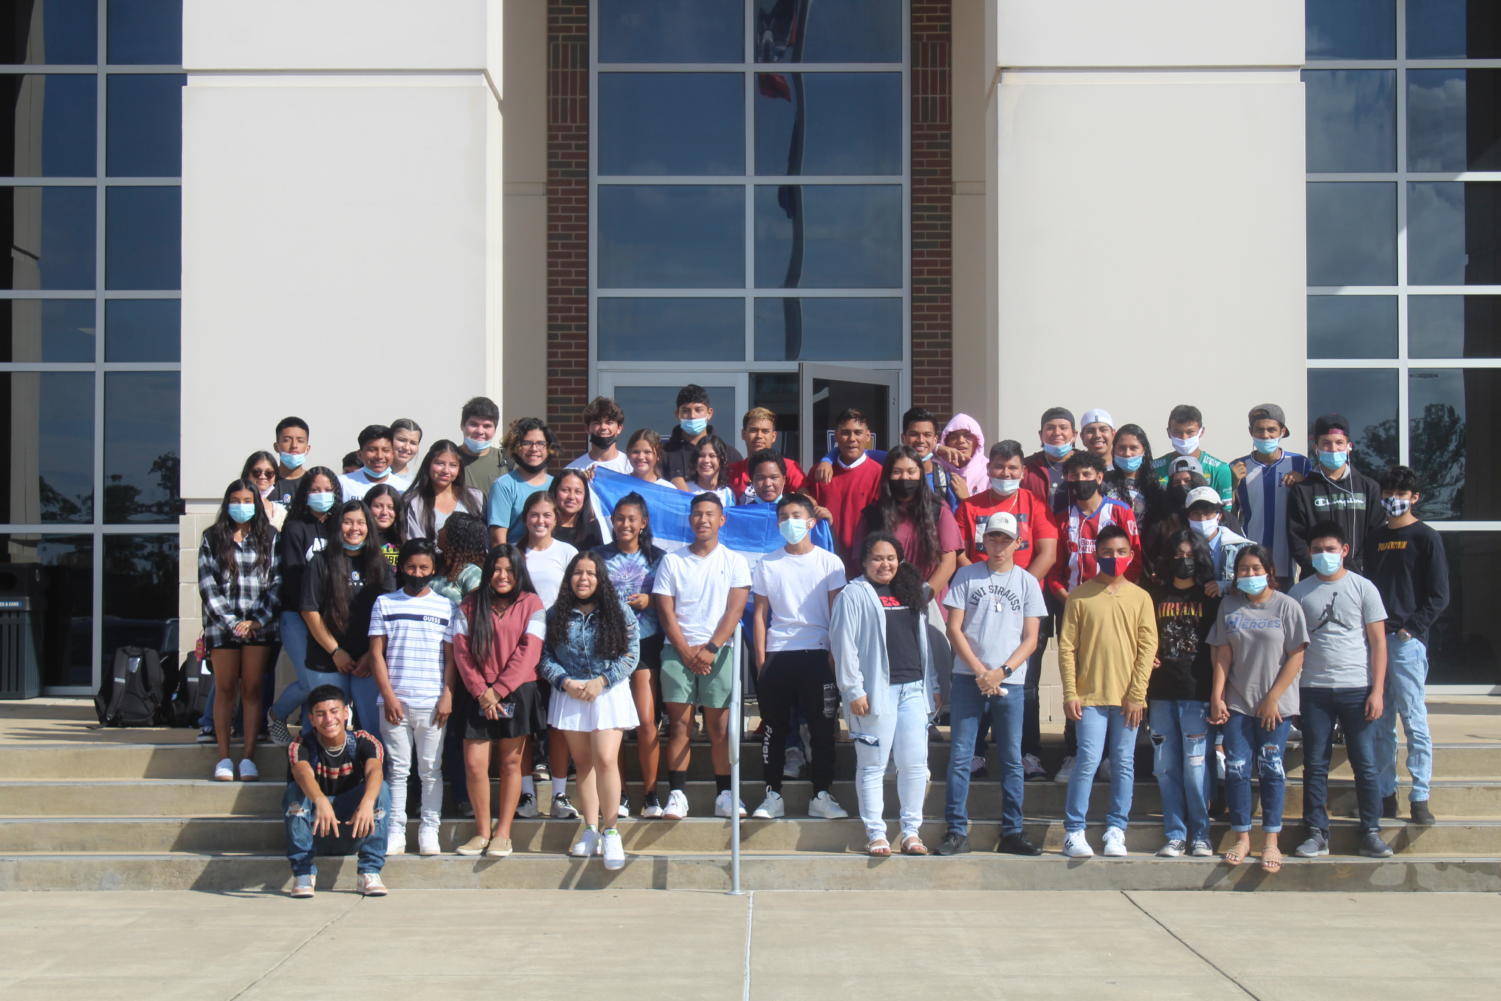 OHS students with Hispanic Heritage stand together to honor Hispanic Heritage month. The native student countries represented in this picture are mostly Honduras, Guatemala, and Mexico, while certain heritage lines trace back to many other countries. 77 Oxford students have Hispanic Heritage, but not all were present for this picture.